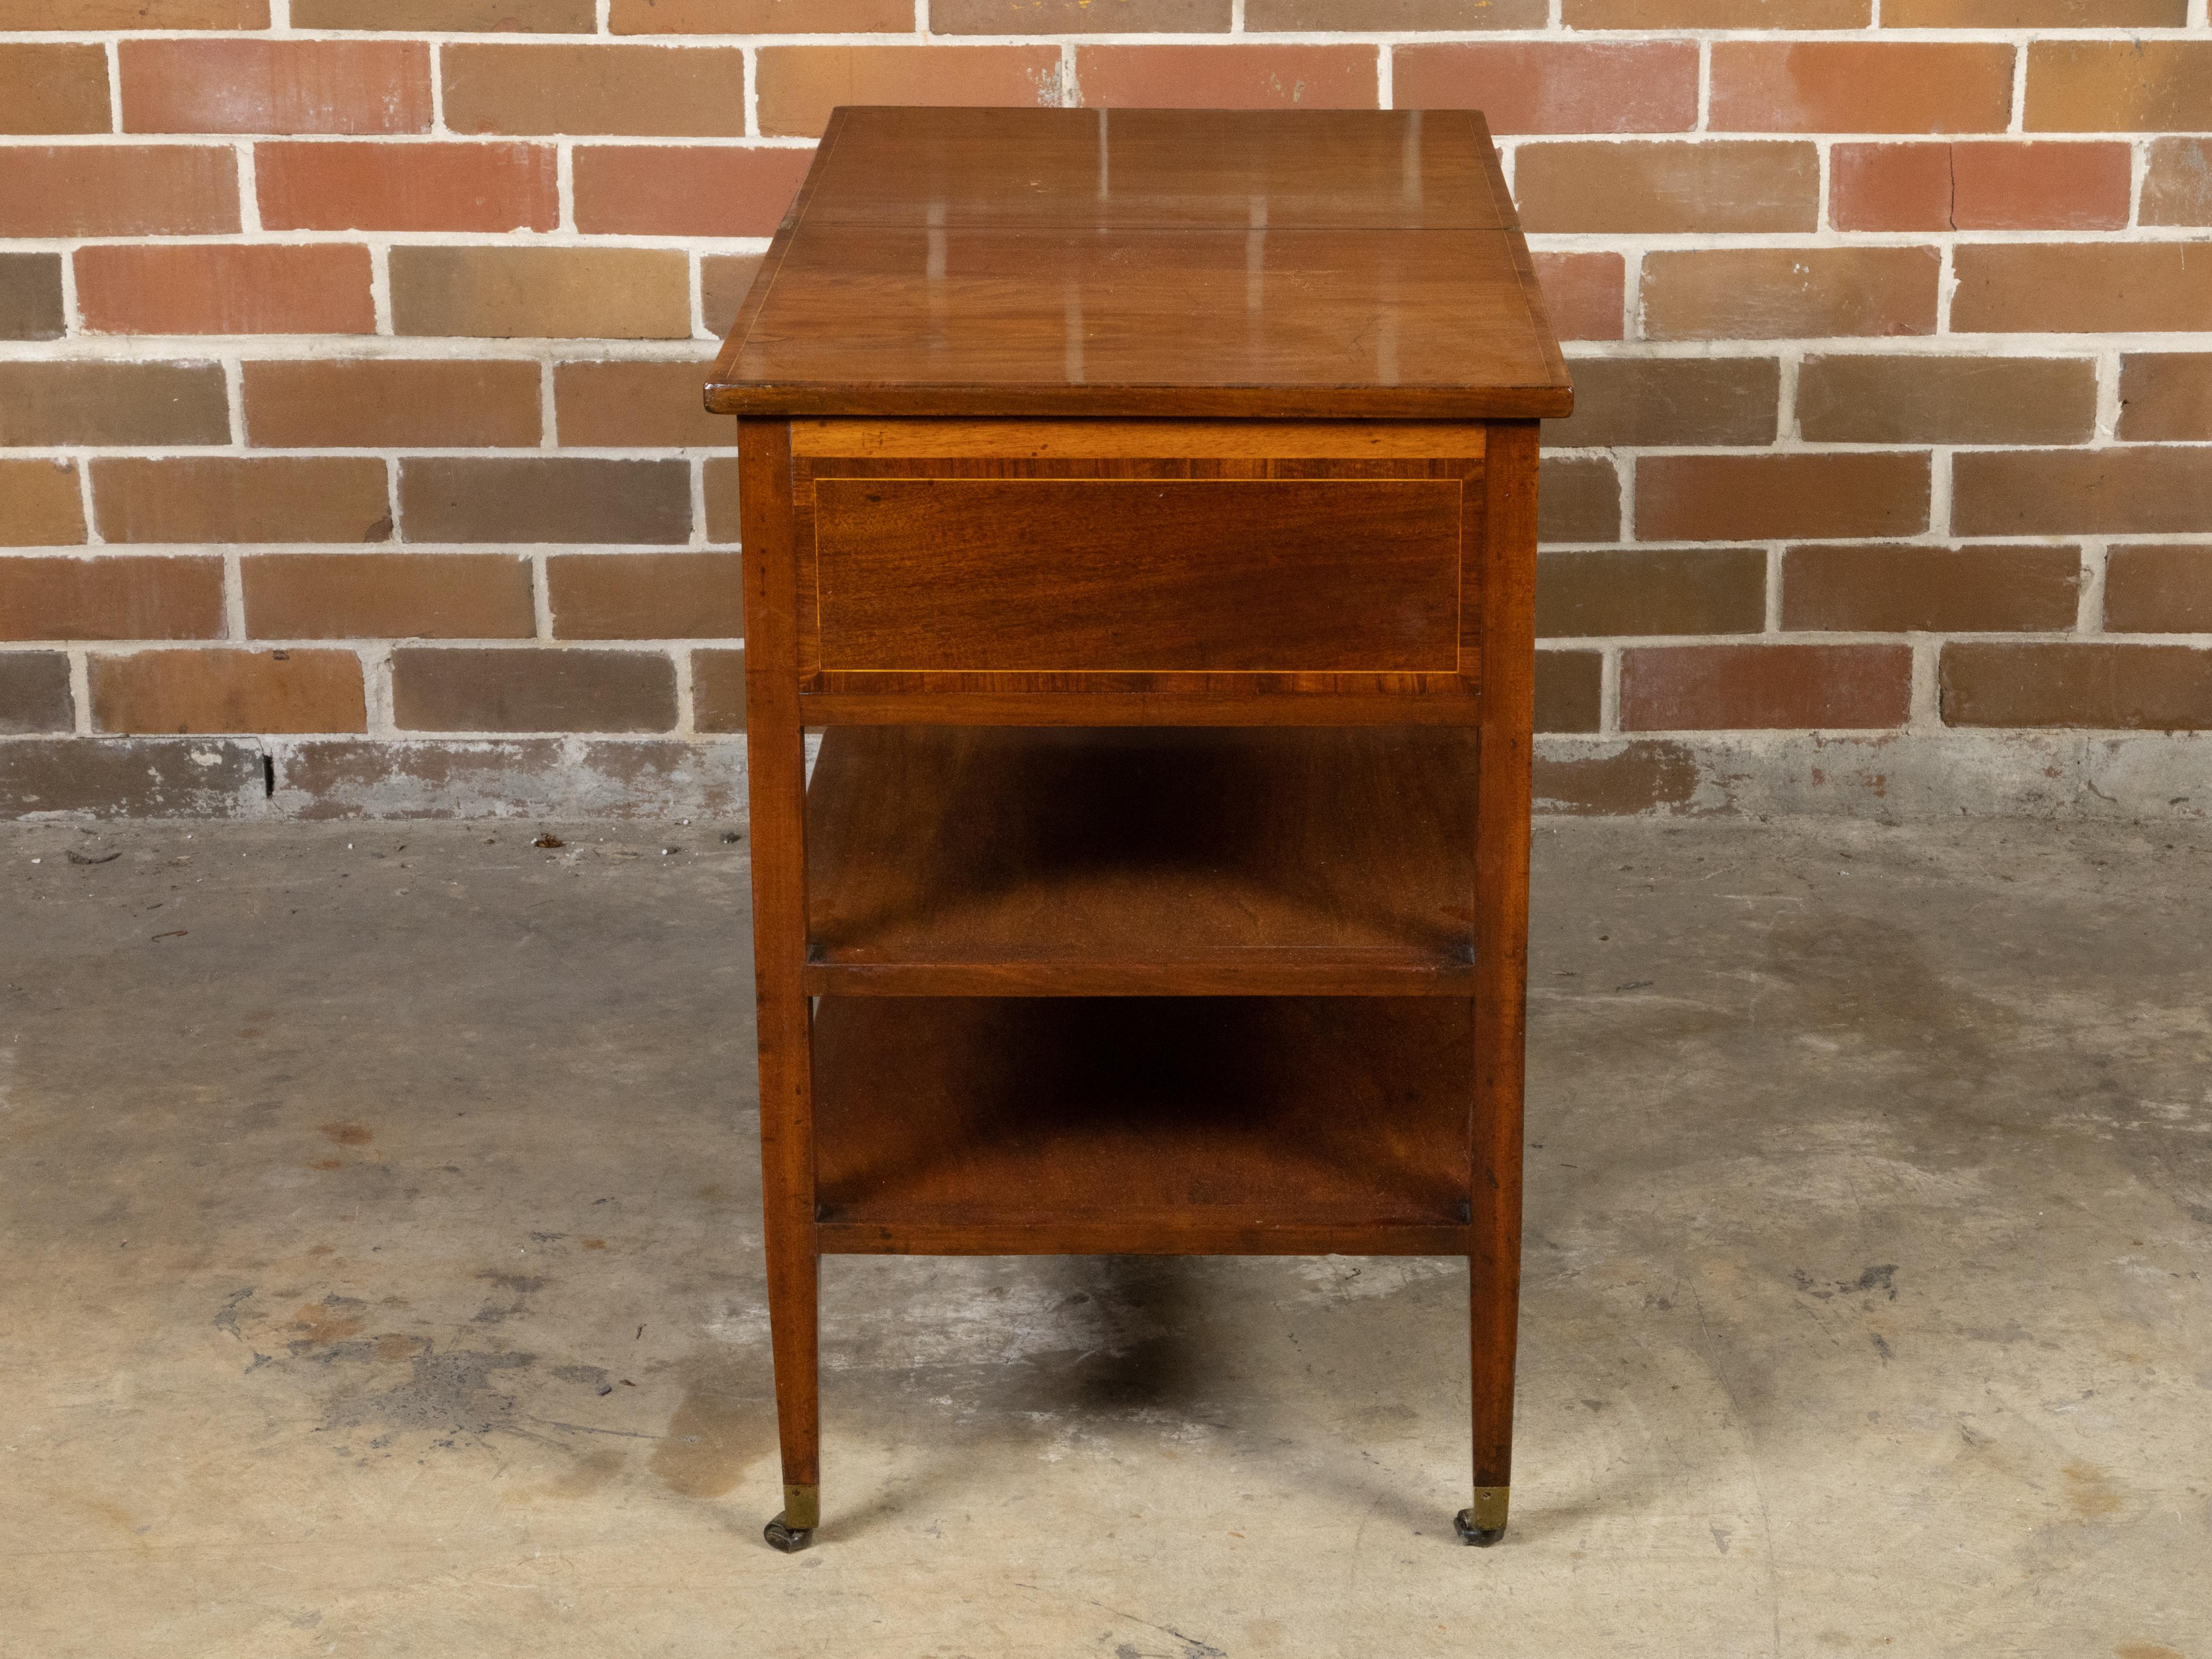 English 19th Century Metamorphic Table with Lift Top, Drawers and Shelves For Sale 6